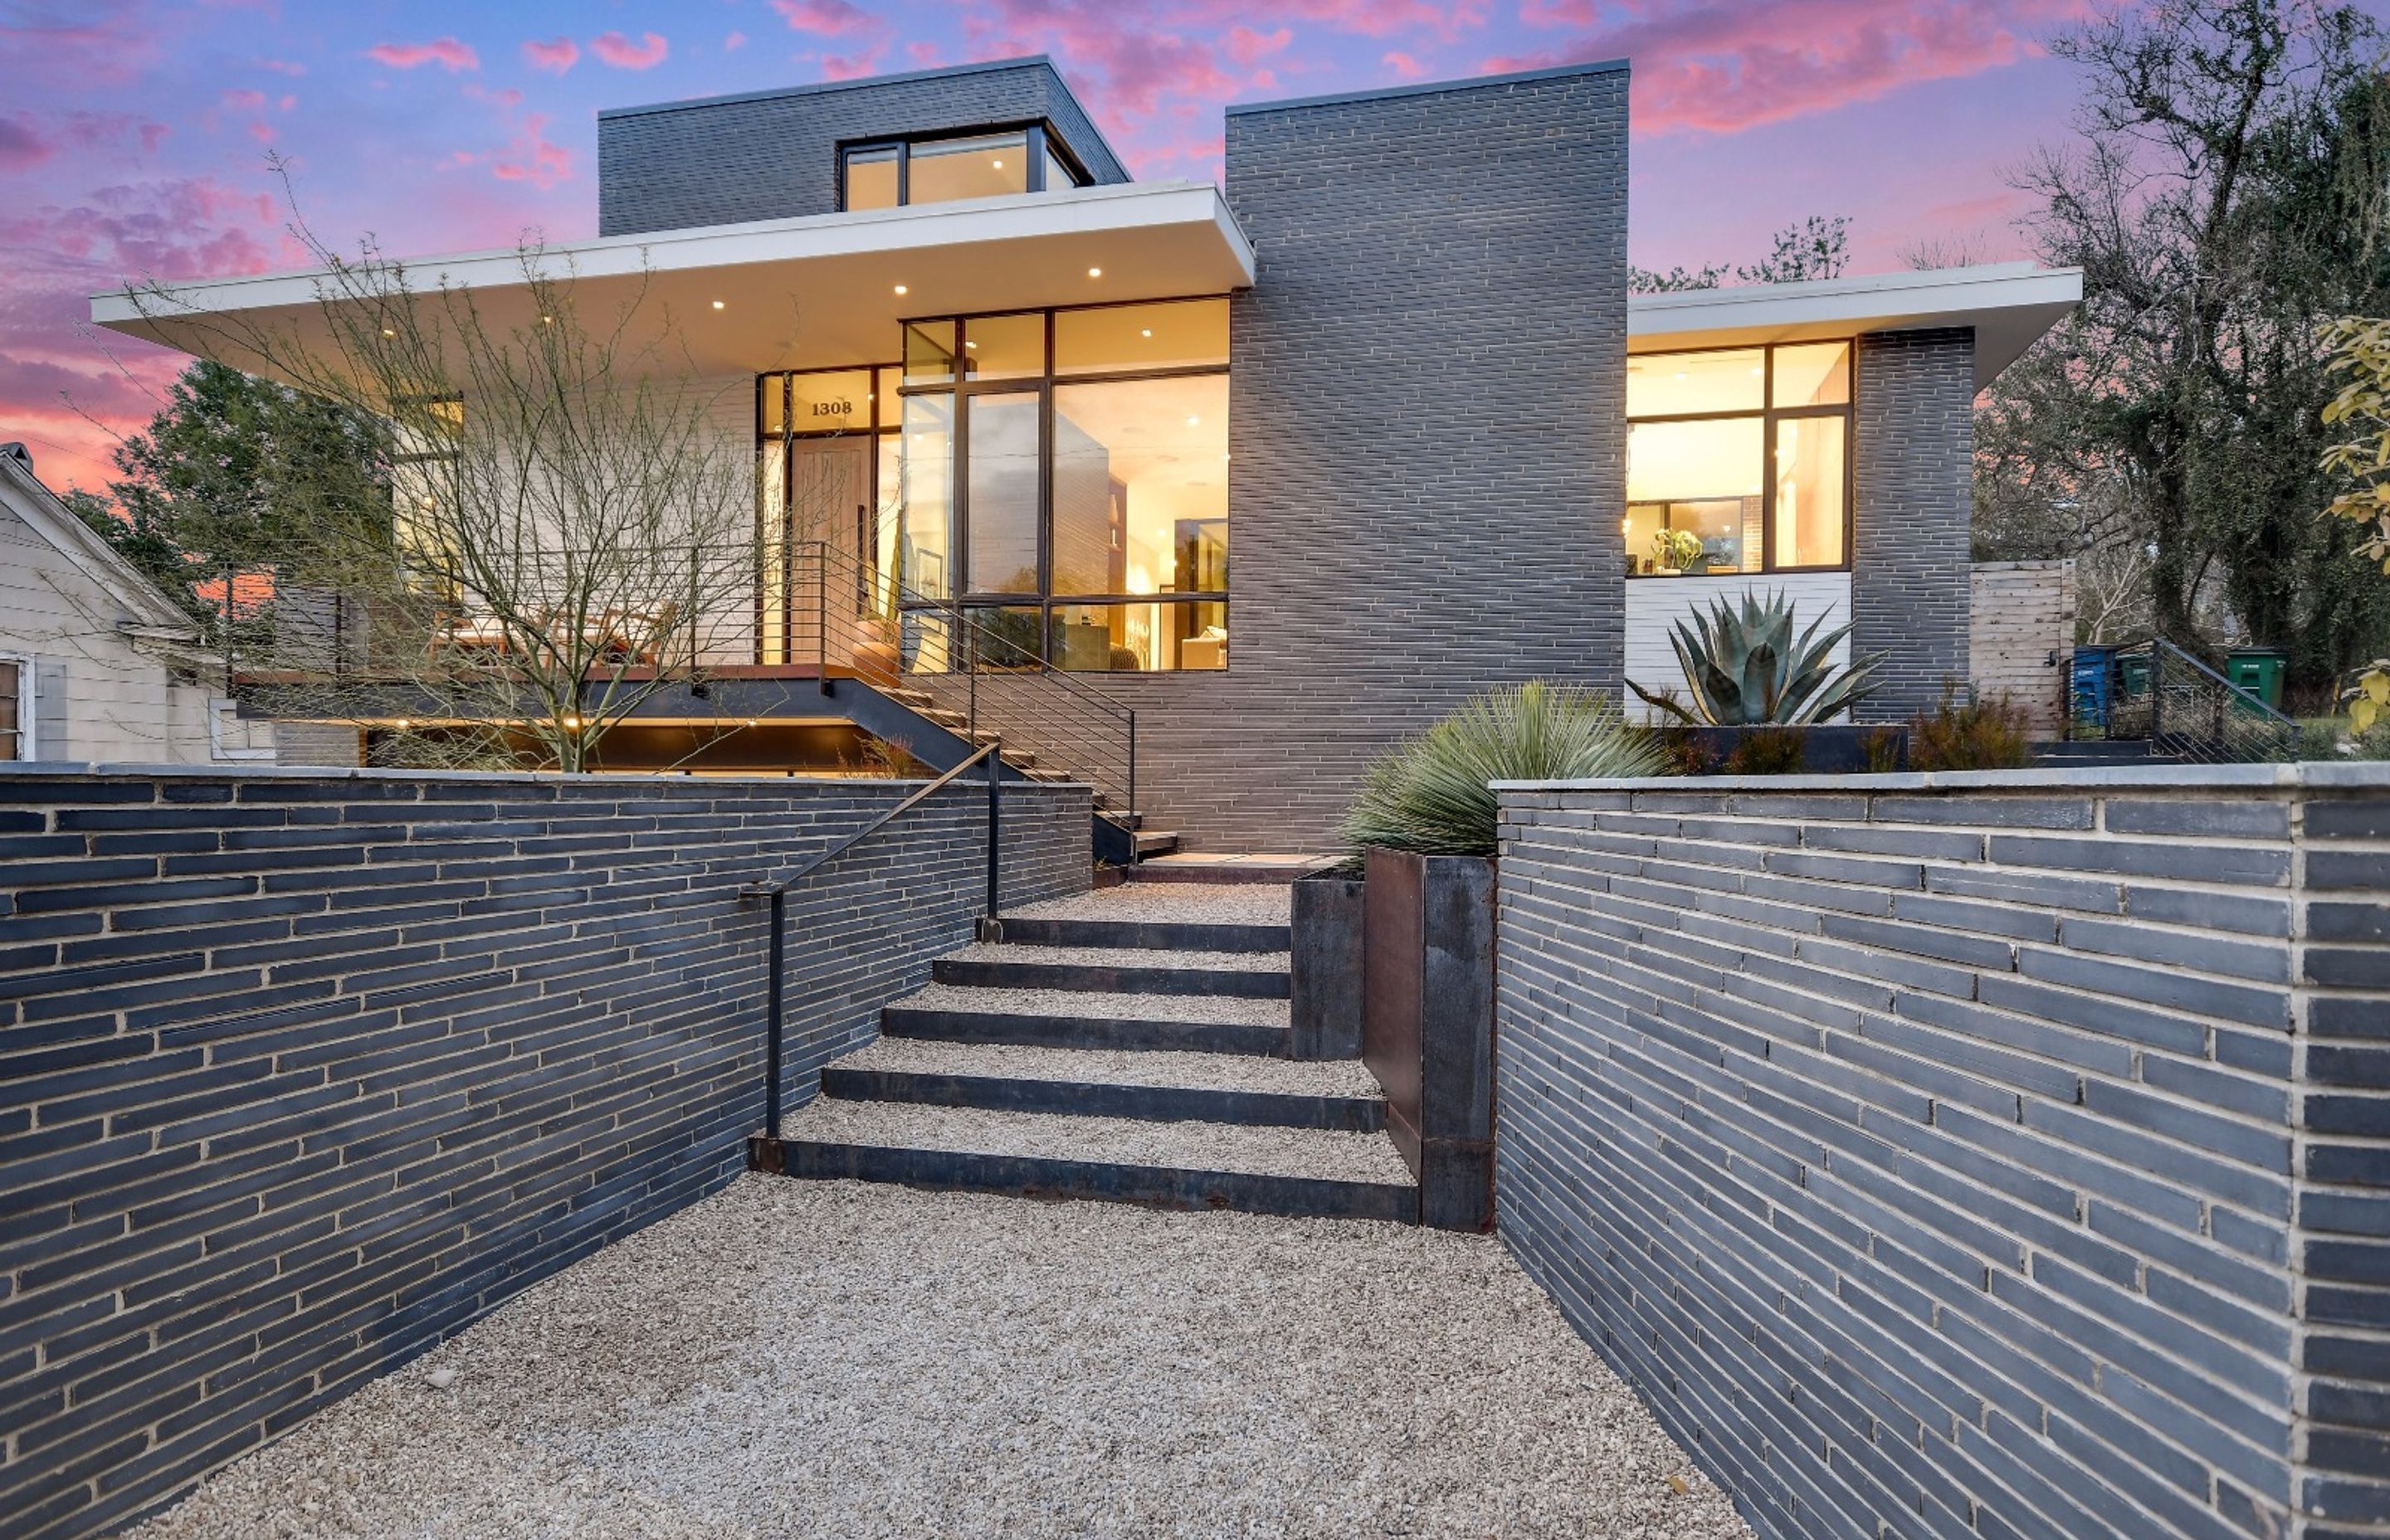 Dramatic proportions inherent in long-format bricks accentuate the linear feel of this walled entrance.